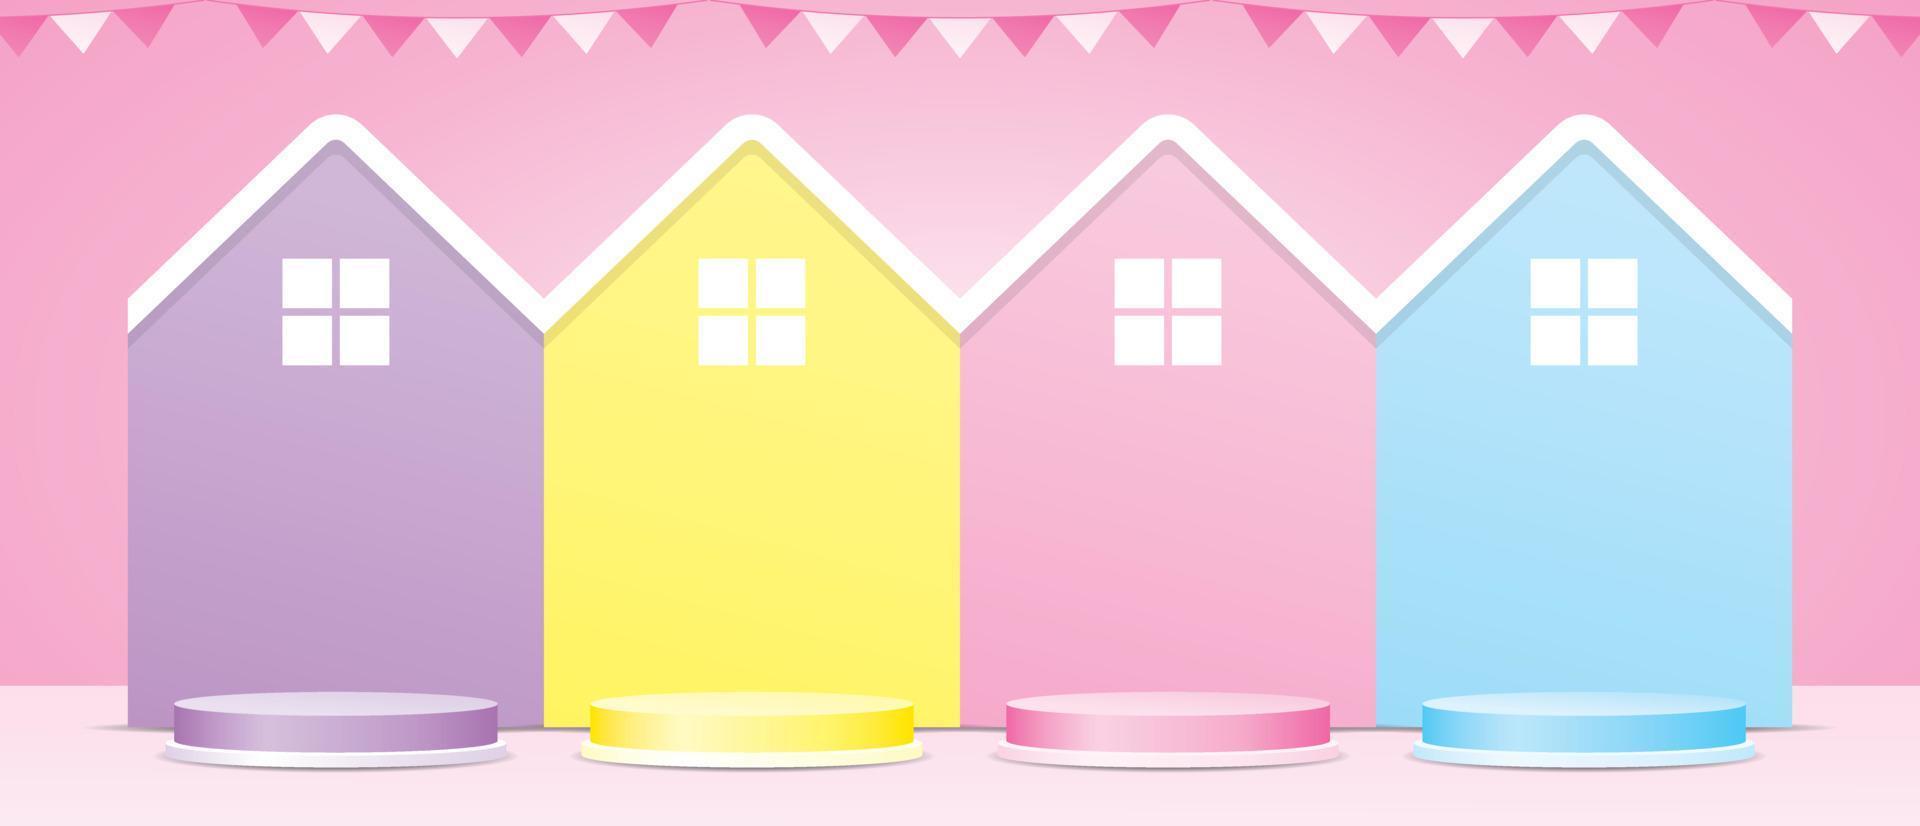 cute pastel house shape backdrop with circle podium 3d illustration vector for putting your object